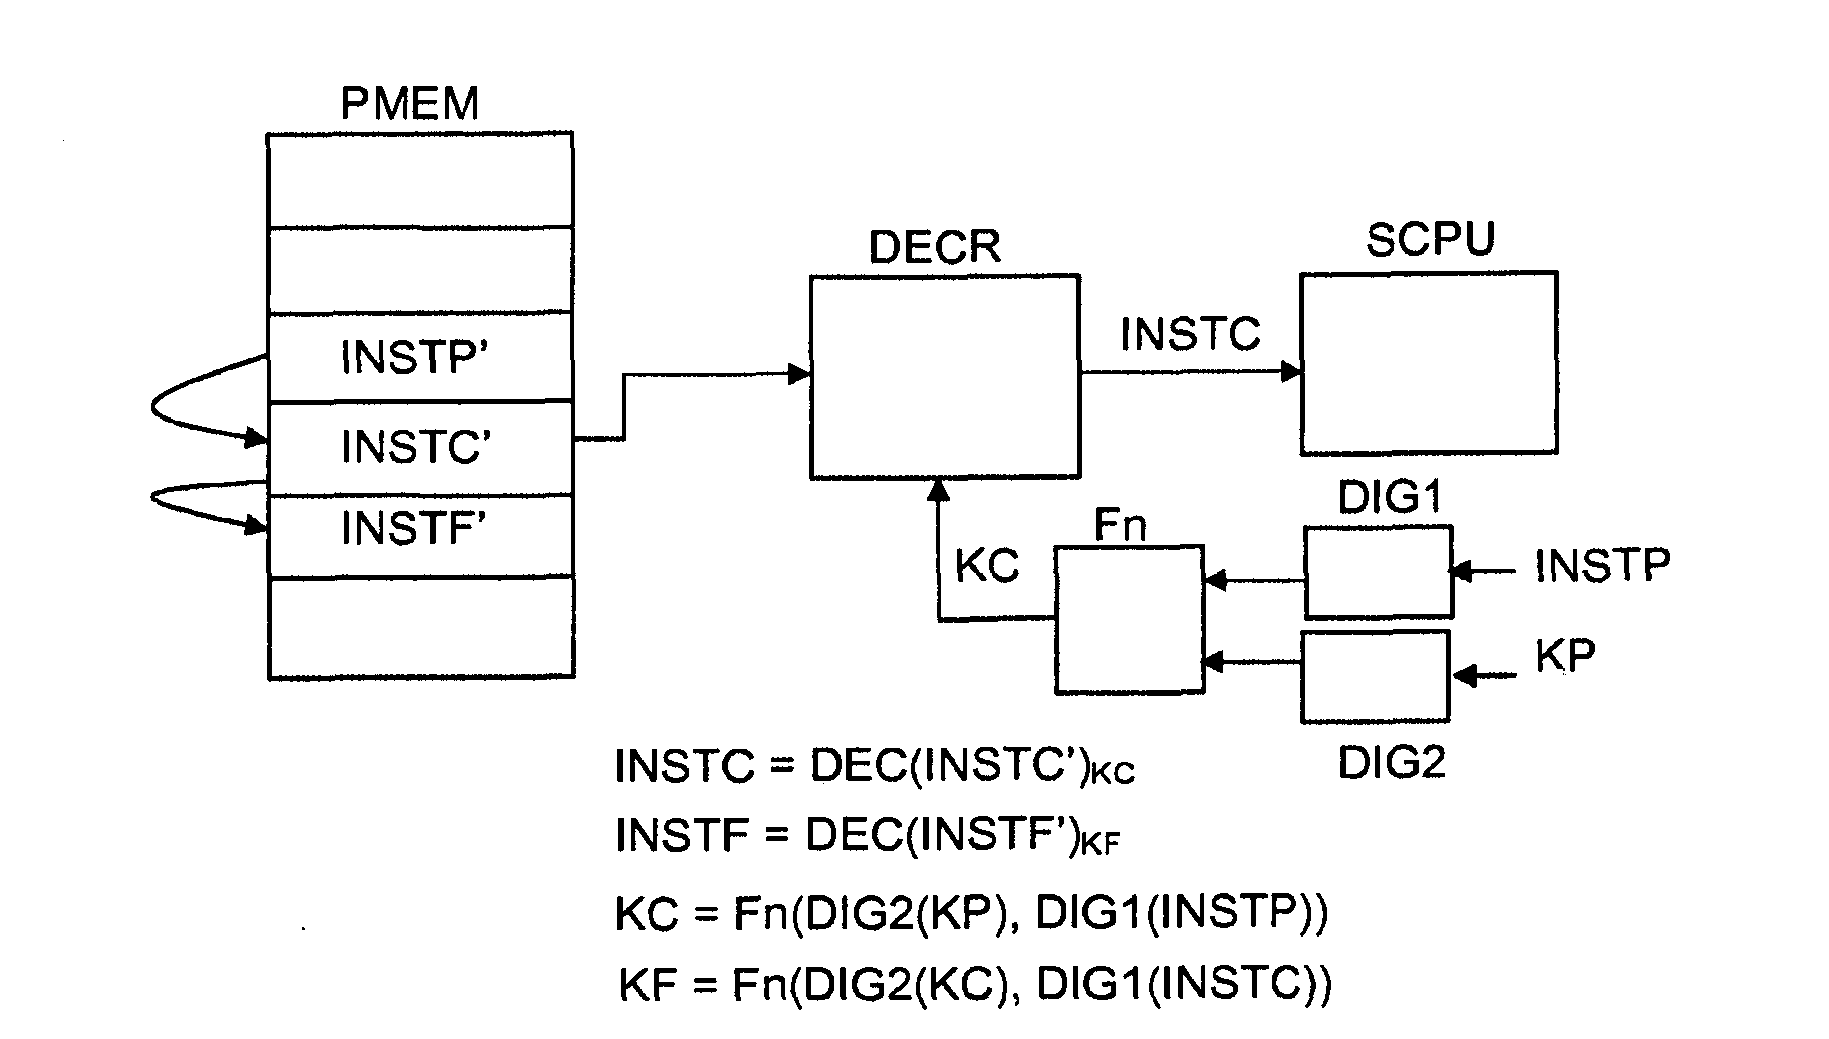 A processor-implemented method for ensuring software integrity